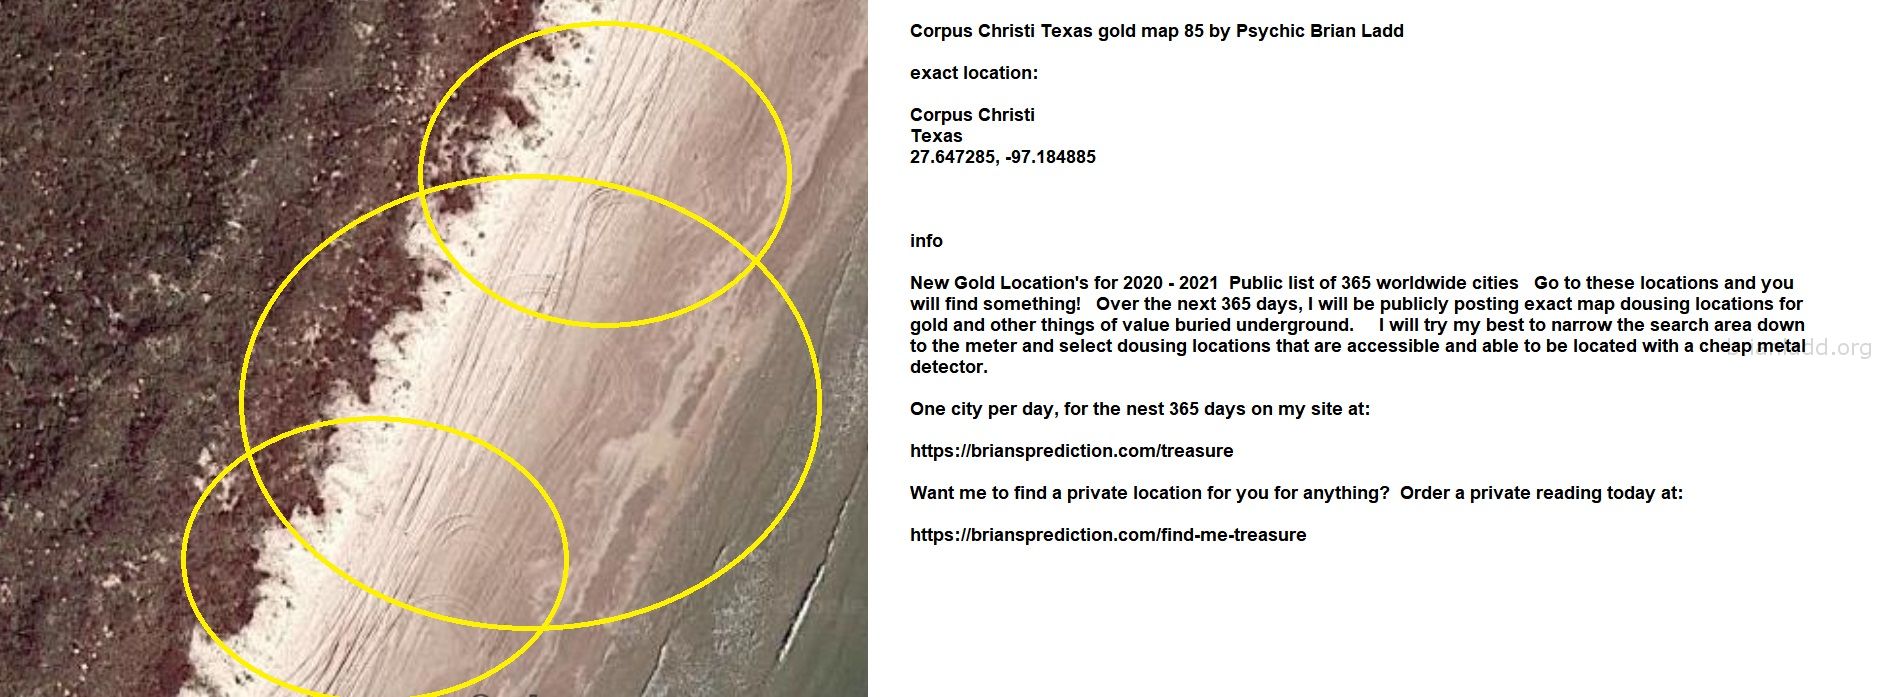 Corpus Christi Texas Gold Map 85 By Psychic Brian Ladd - Corpus Christi Texas Gold Map 85 By Psychic Brian Ladd  Exact L...
Corpus Christi Texas Gold Map 85 By Psychic Brian Ladd  Exact Location:  Corpus Christi  Texas  27.647285, -97.184885  Info  New Gold Location'S For 2020 - 2021  Public List Of 365 Worldwide Cities  Go To These Locations And You Will Find Something!  Over The Next 365 Days, I Will Be Publicly Posting Exact Map Dousing Locations For Gold And Other Things Of Value Buried Underground.  I Will Try My Best To Narrow The Search Area Down To The Meter And Select Dousing Locations That Are Accessible And Able To Be Located With A Cheap Metal Detector.  One City Per Day, For The Nest 365 Days On My Site At:   https://briansprediction.com/Treasure  Want Me To Find A Private Location For You For Anything?  Order A Private Reading Today At:   https://briansprediction.com/Find-Me-Treasure
